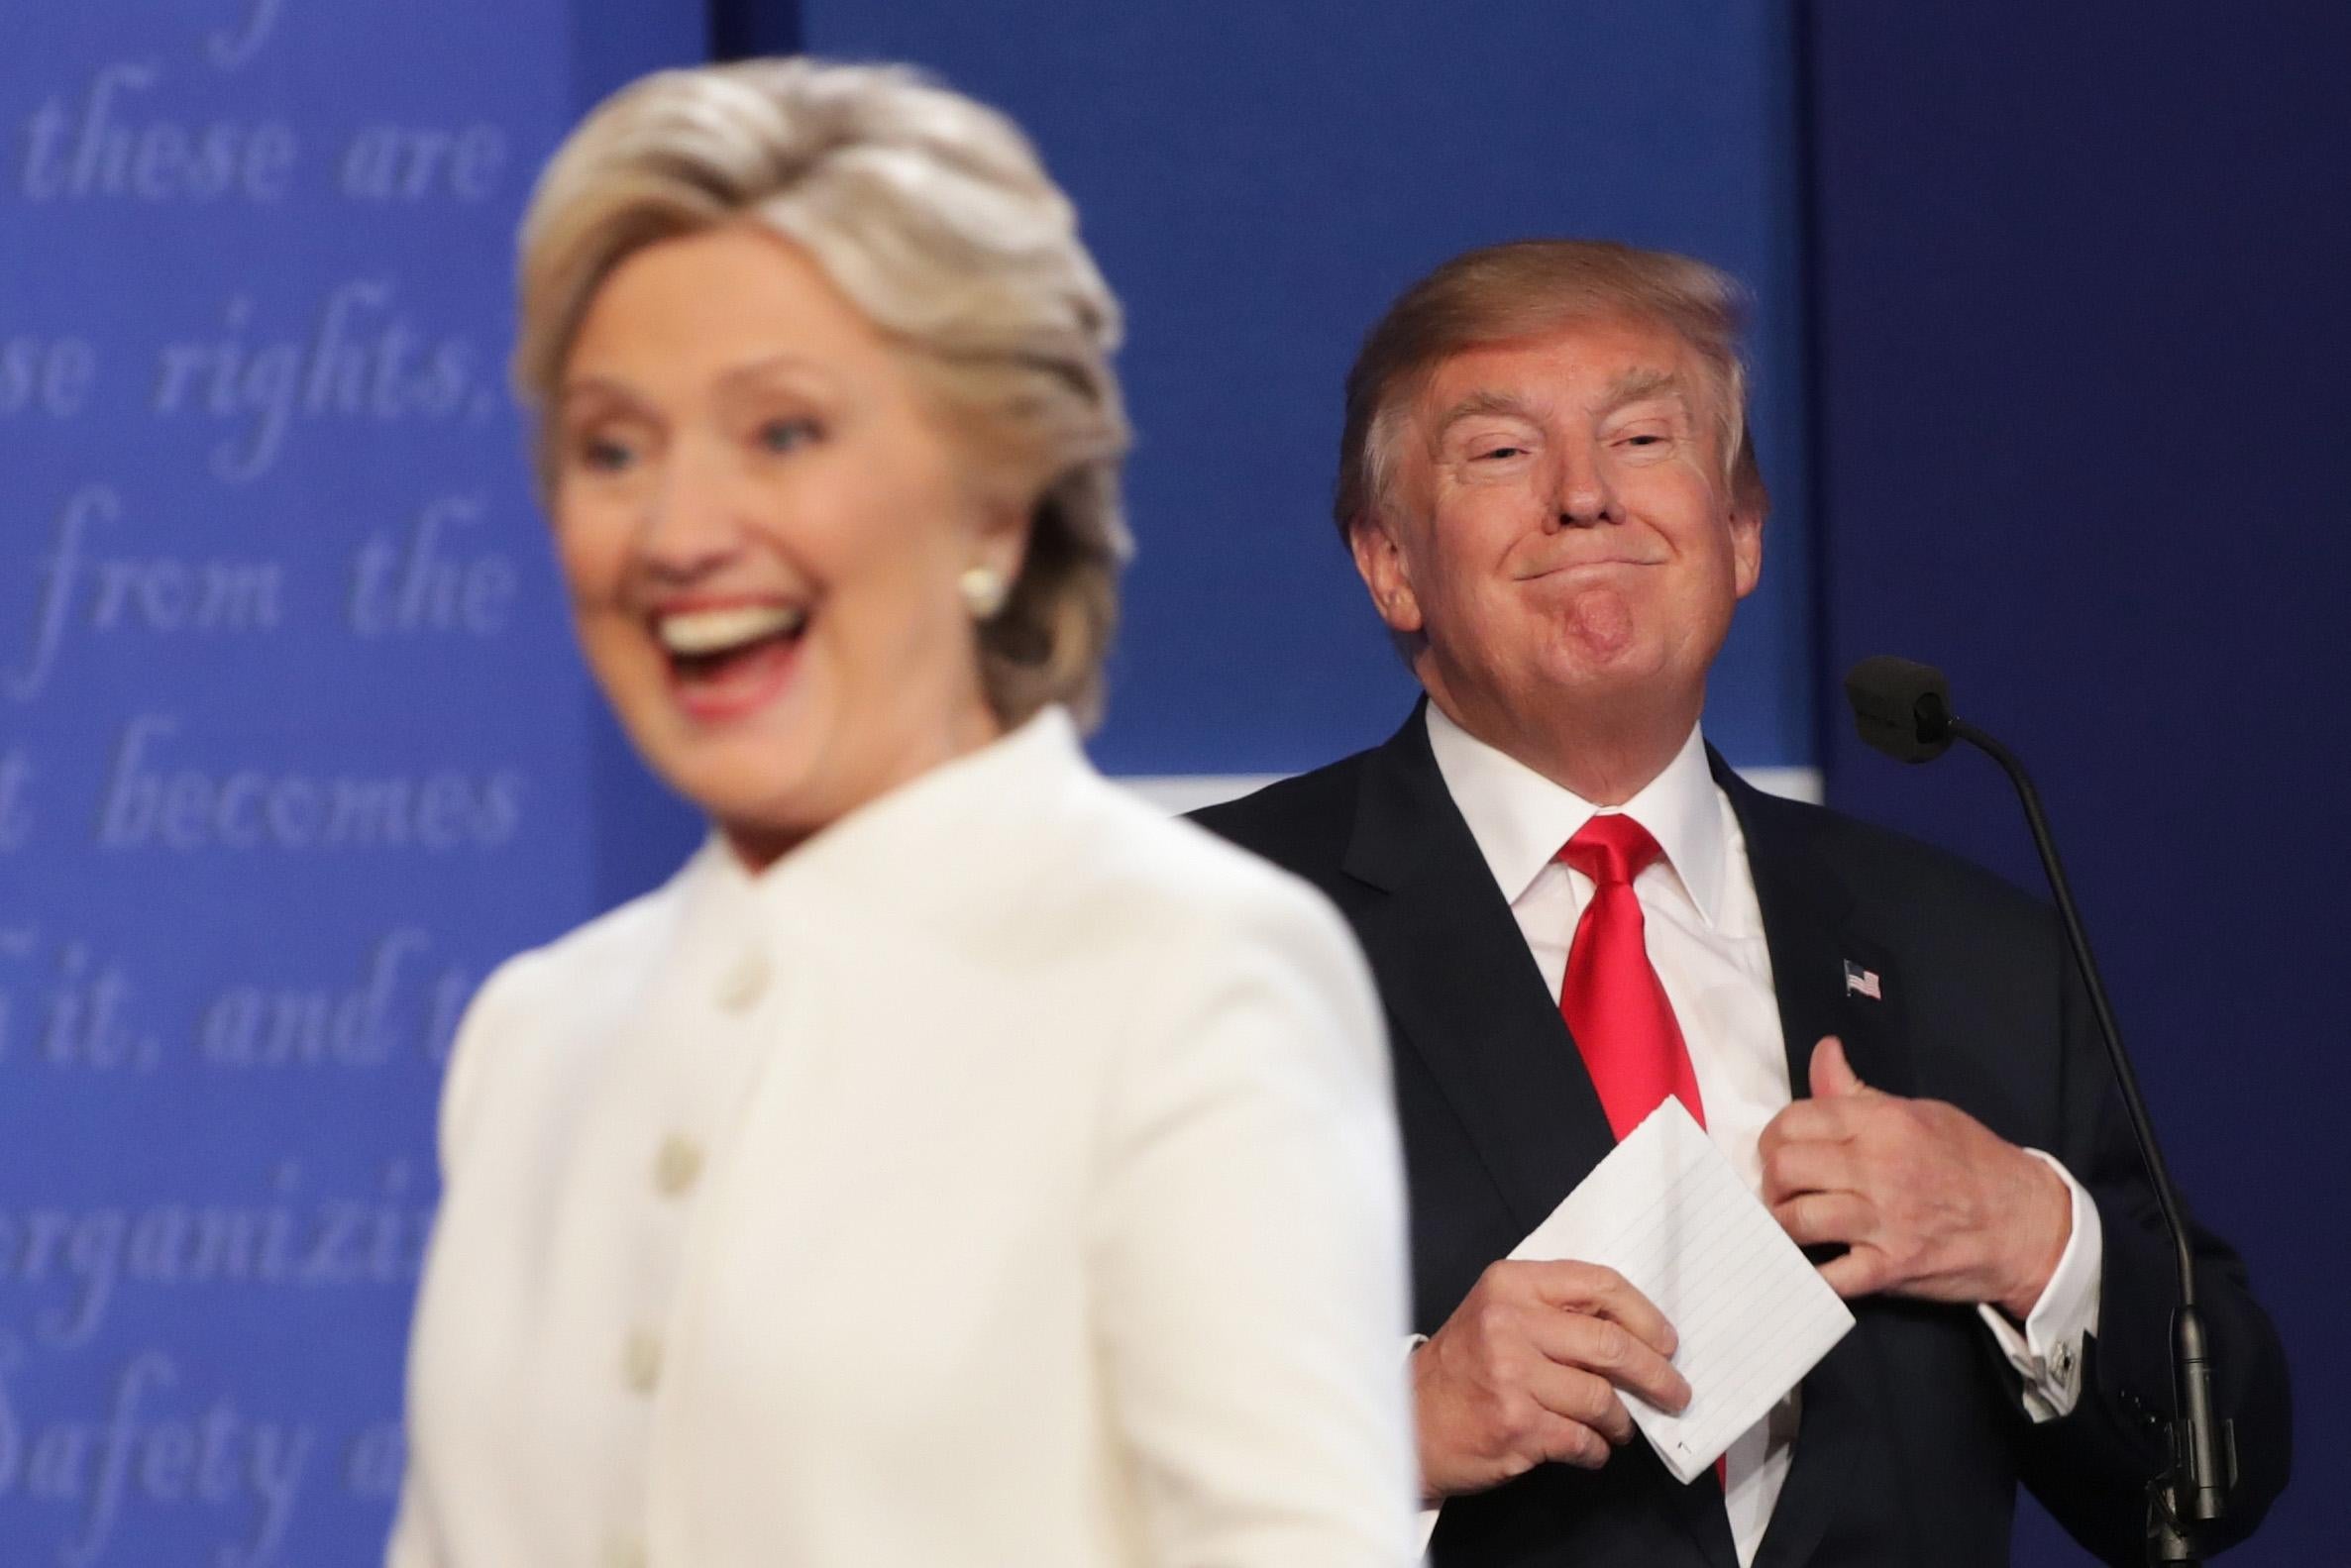 Hillary Clinton and Donald Trump during the presidential debate